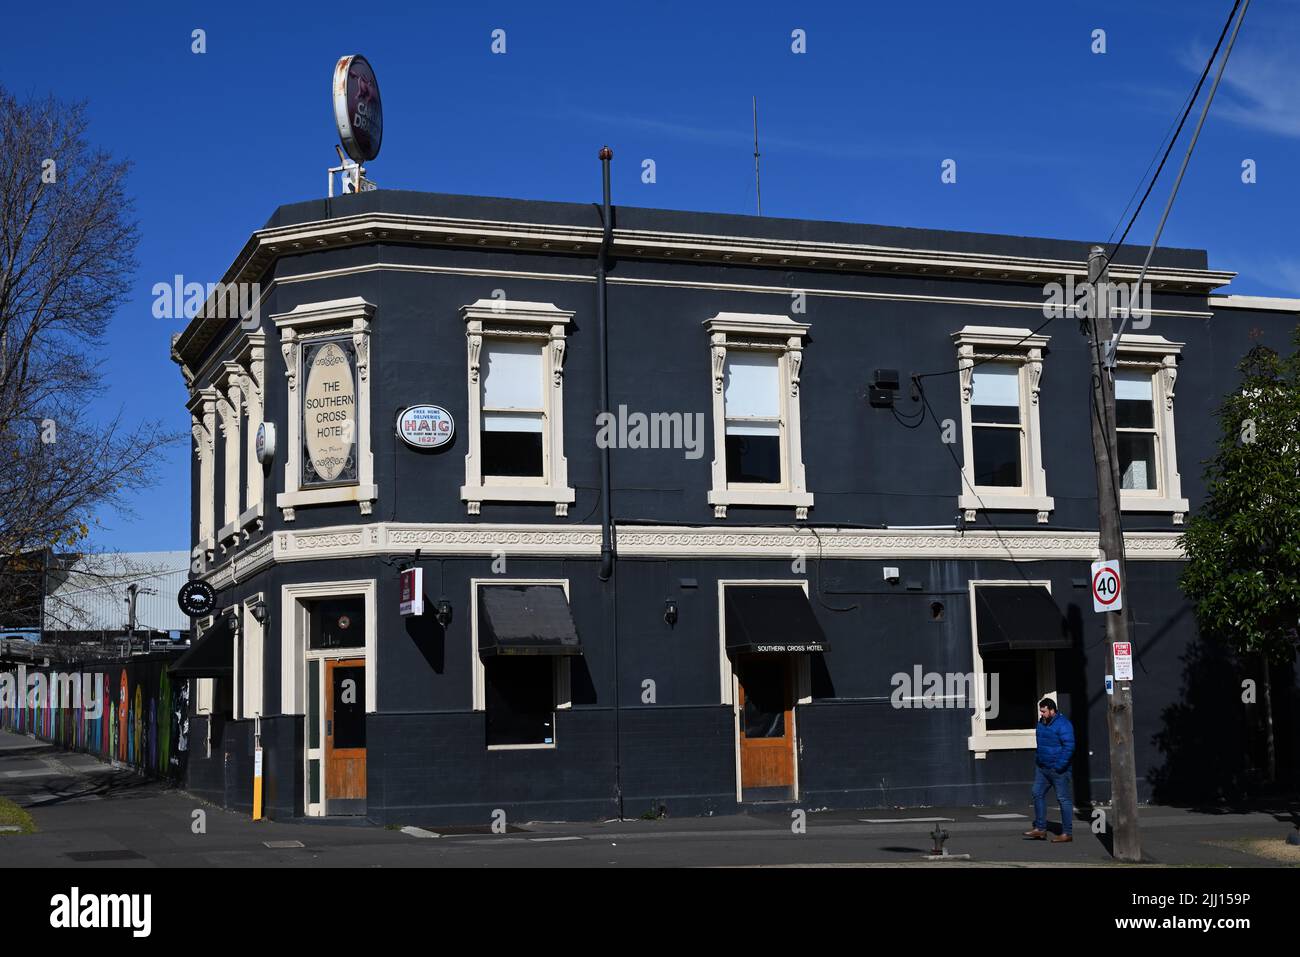 The Southern Cross Hotel, on the corner Cecil St and Market St, seen on a sunny day as a lone man walks by Stock Photo